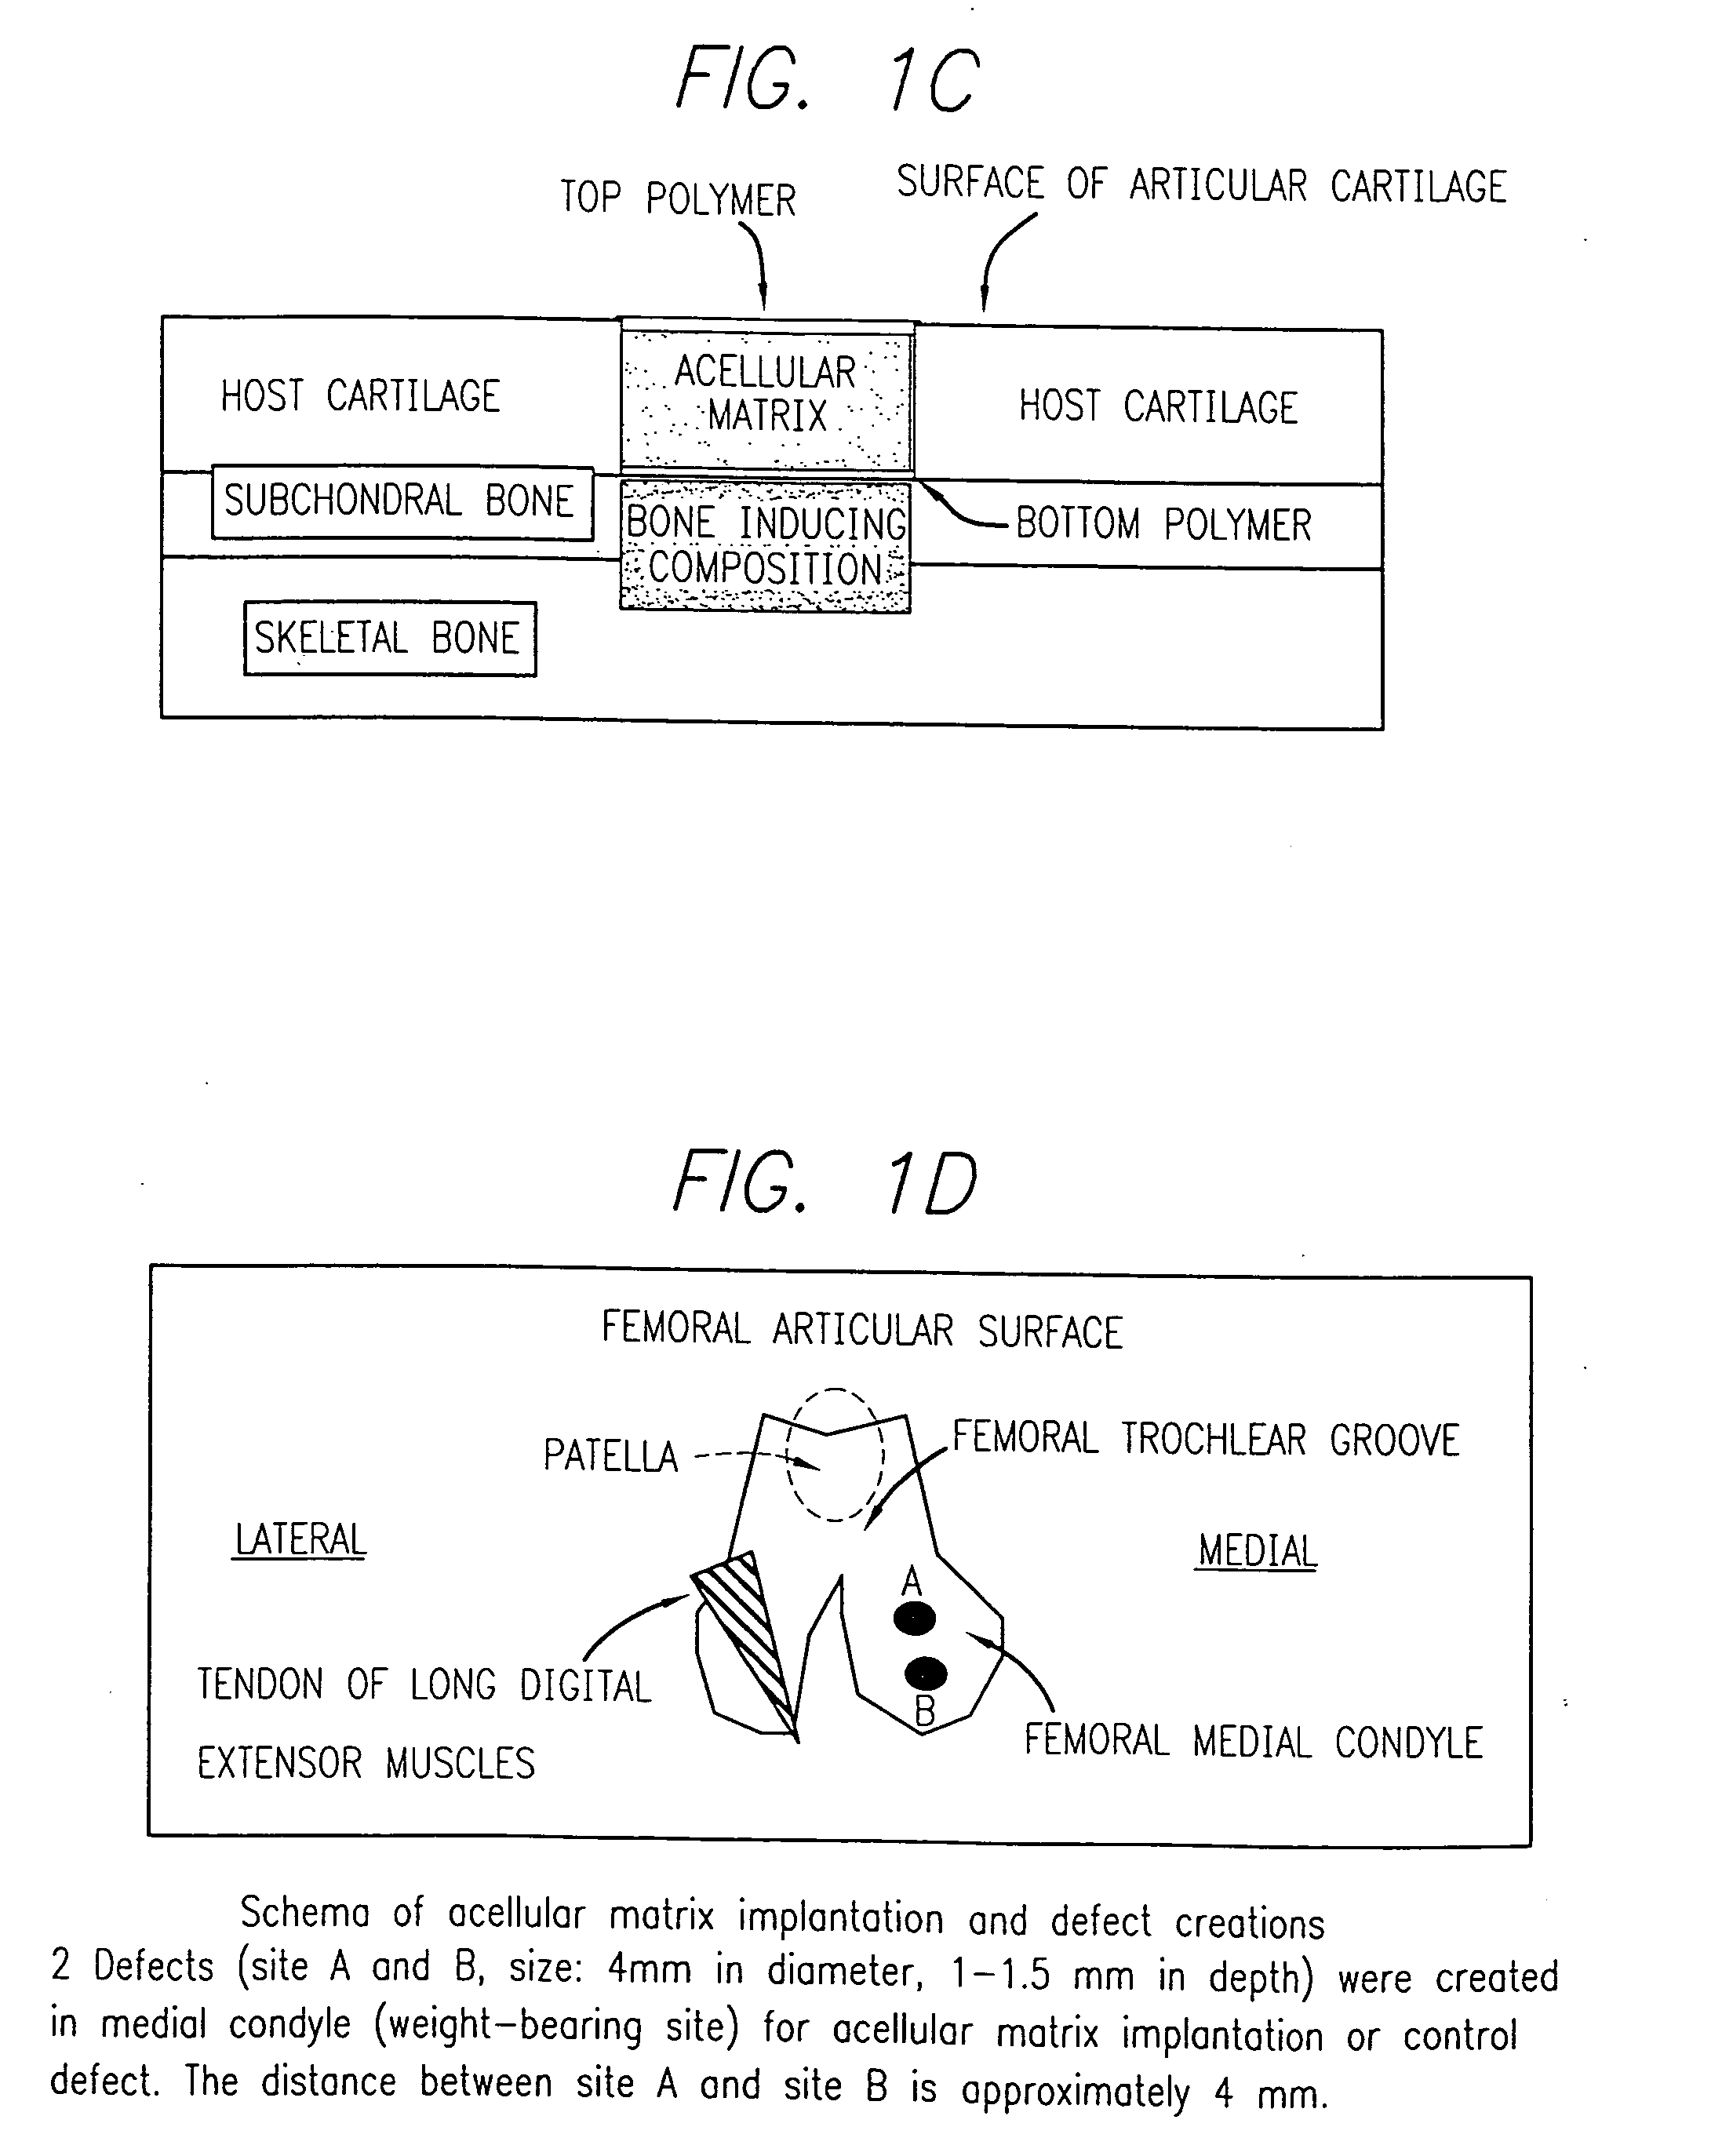 Acellular matrix implanted into an articular cartilage or osteochondral lesion protected with a biodegradable polymer modified to have extended polymerization time and methods for preparation and use thereof